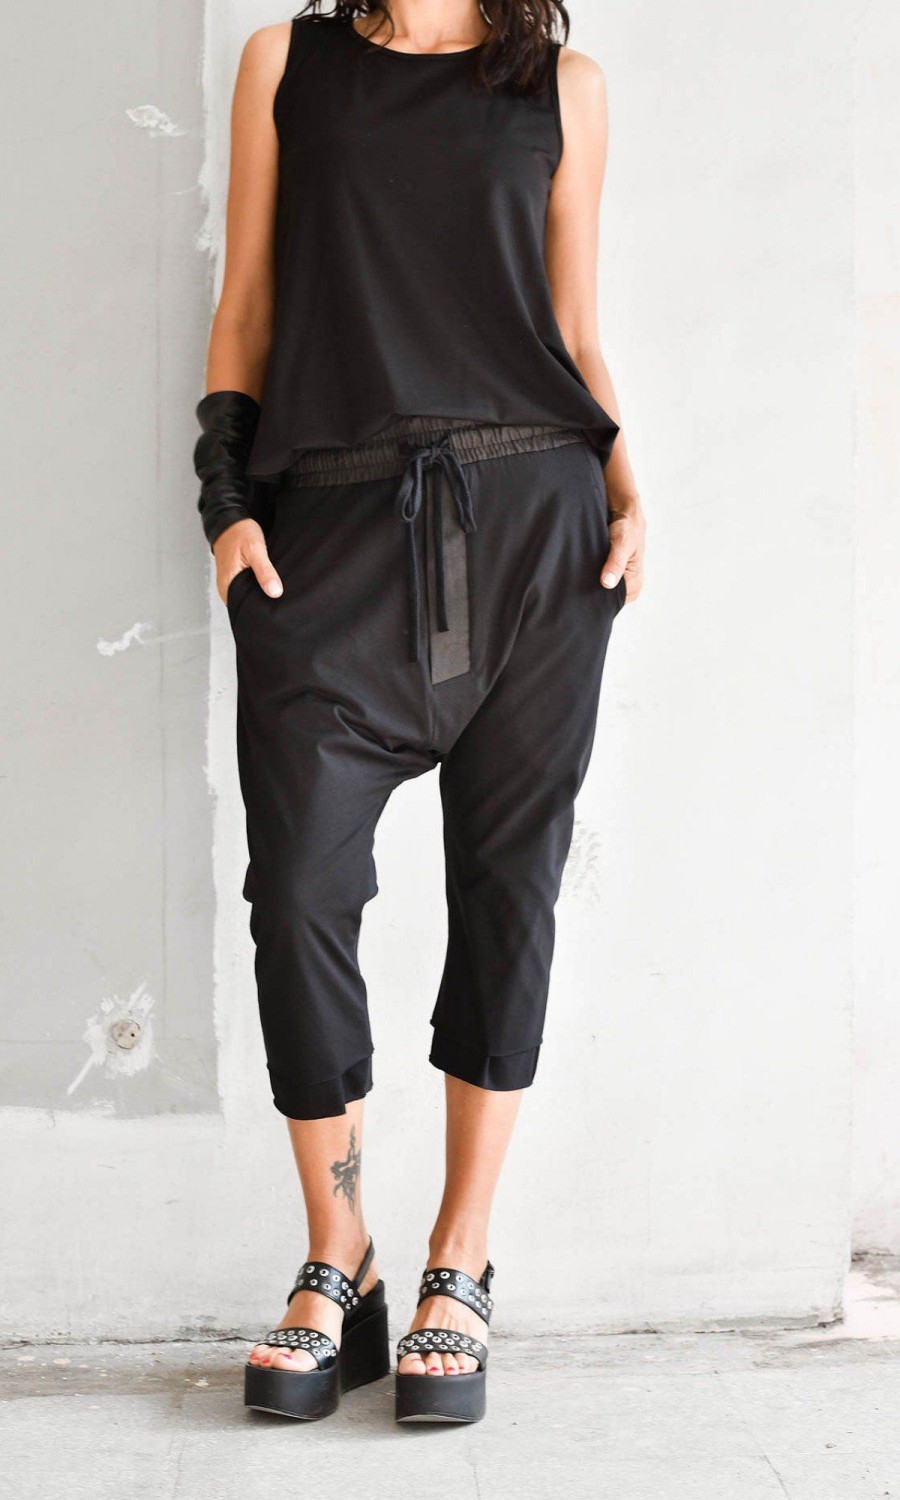 Black Leggings with Vegan Leather Front